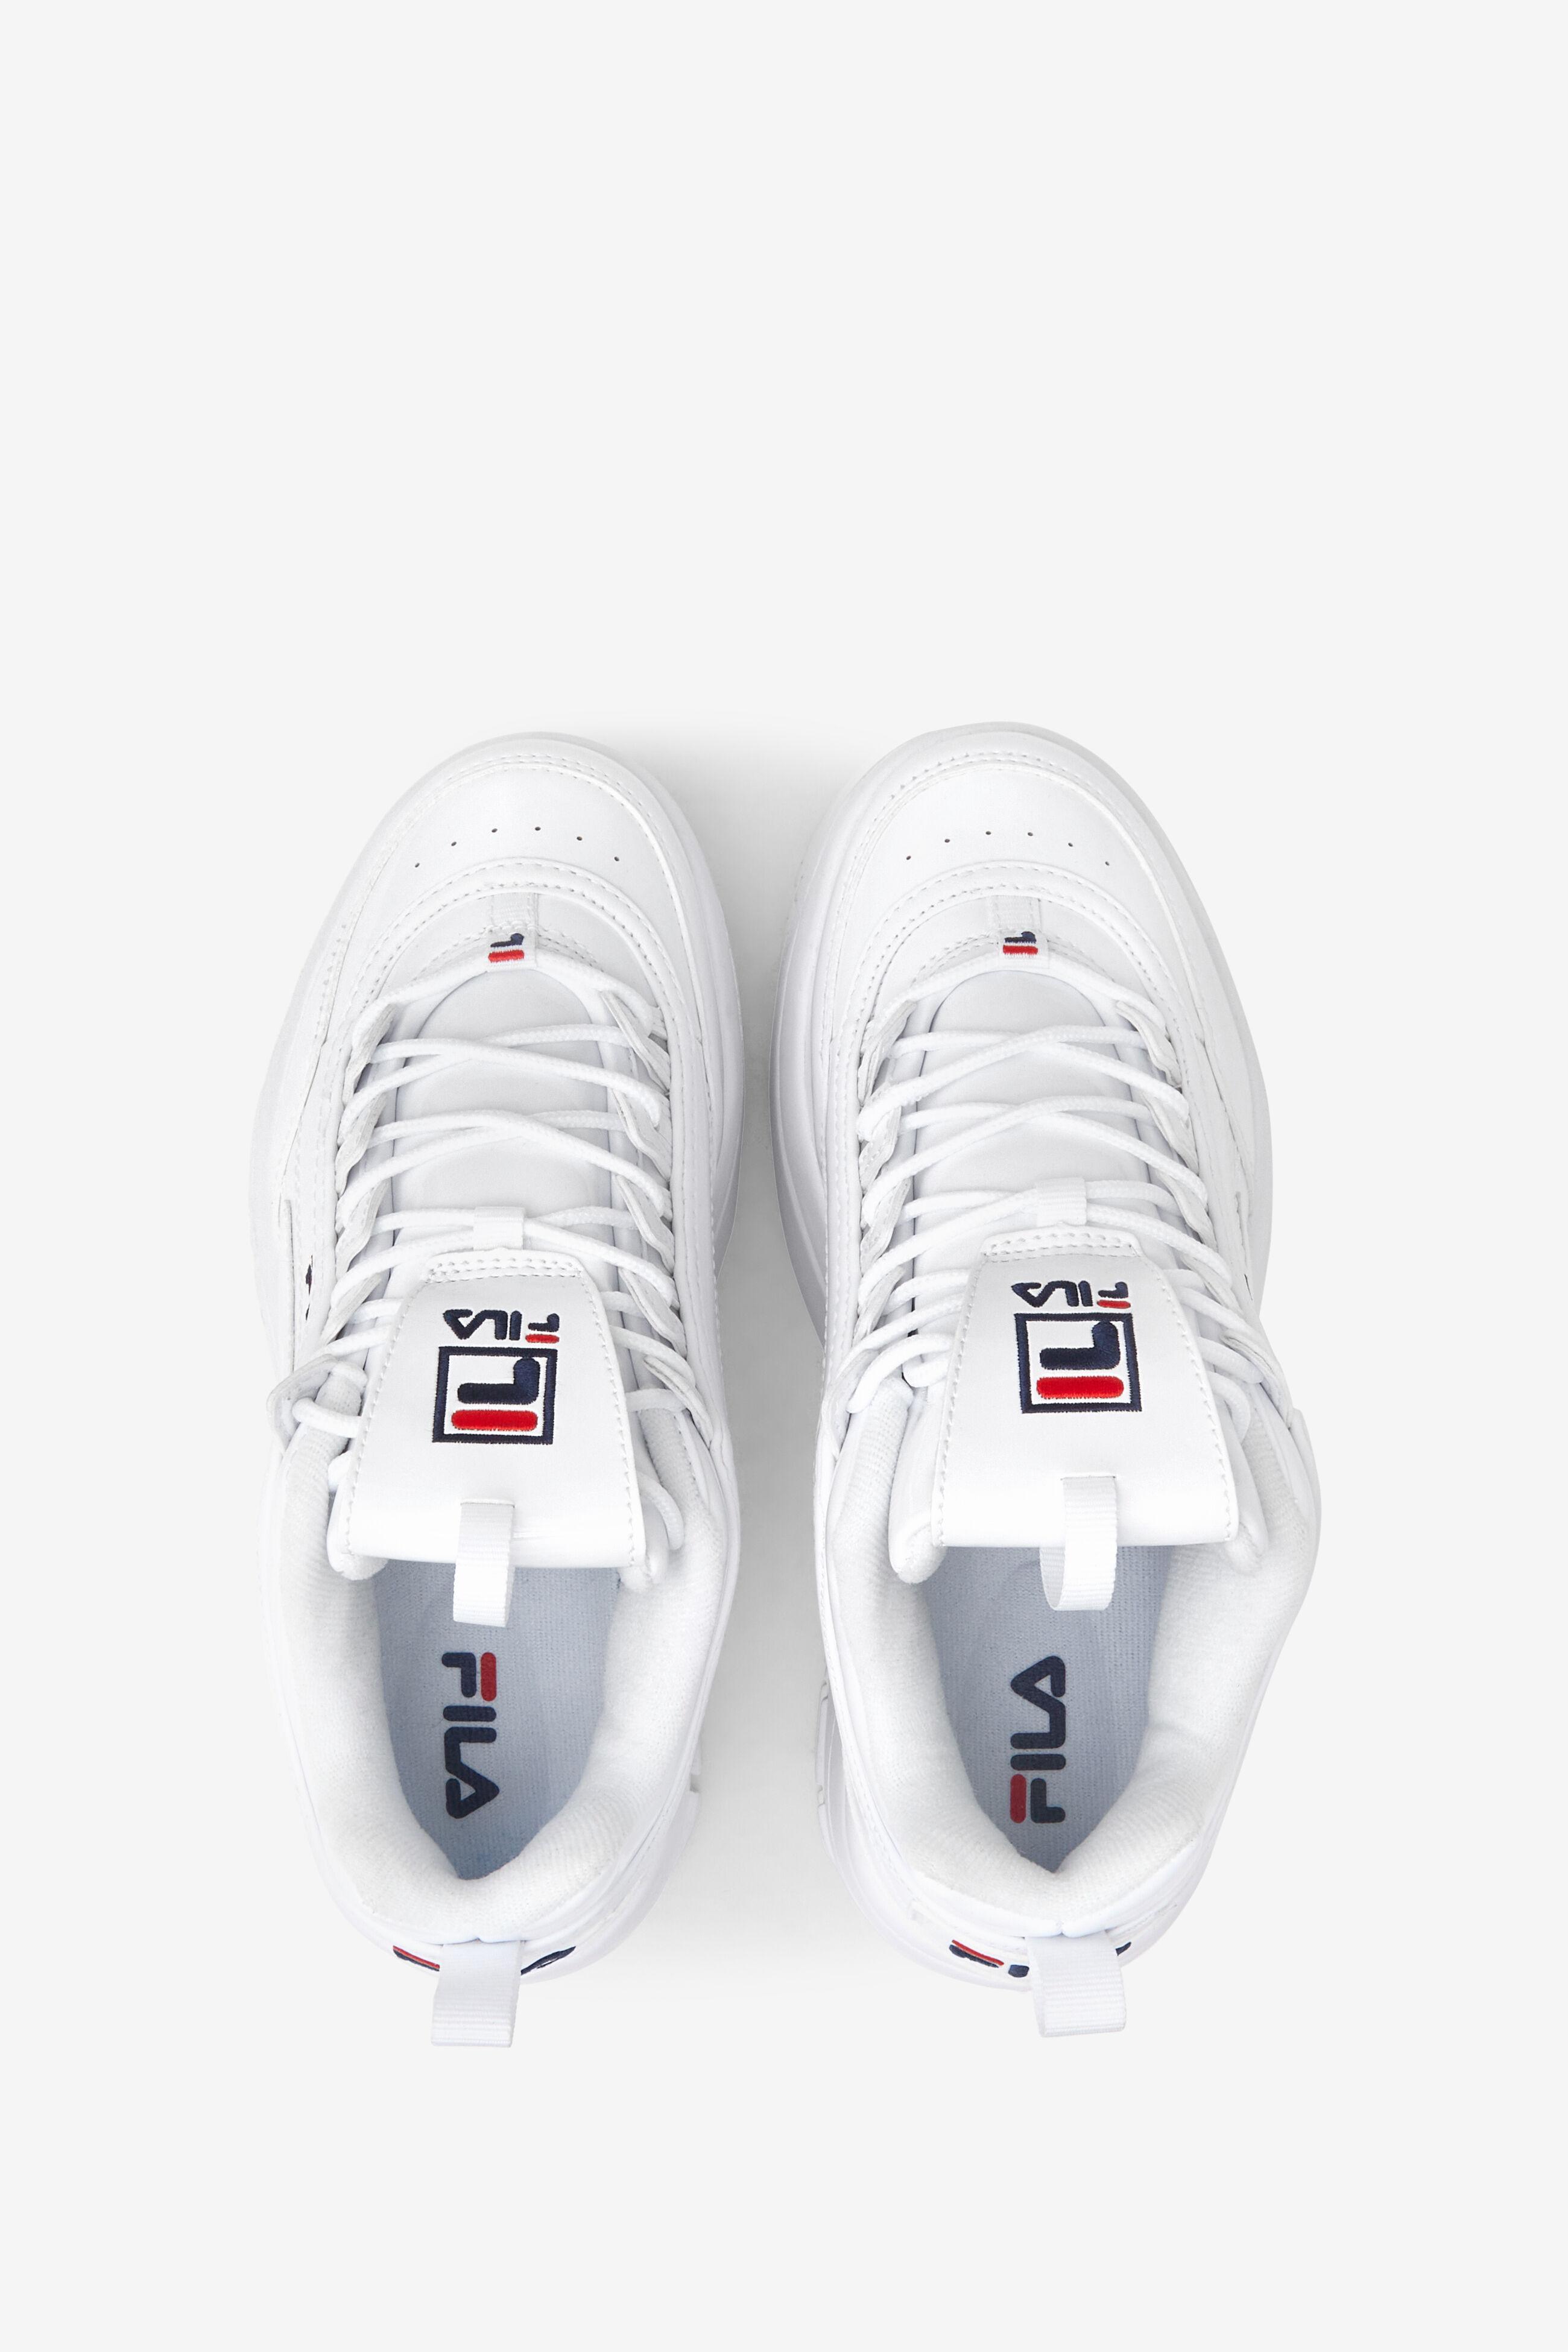 Fila Leather Disruptor 2 Wedge Patent in White | Lyst